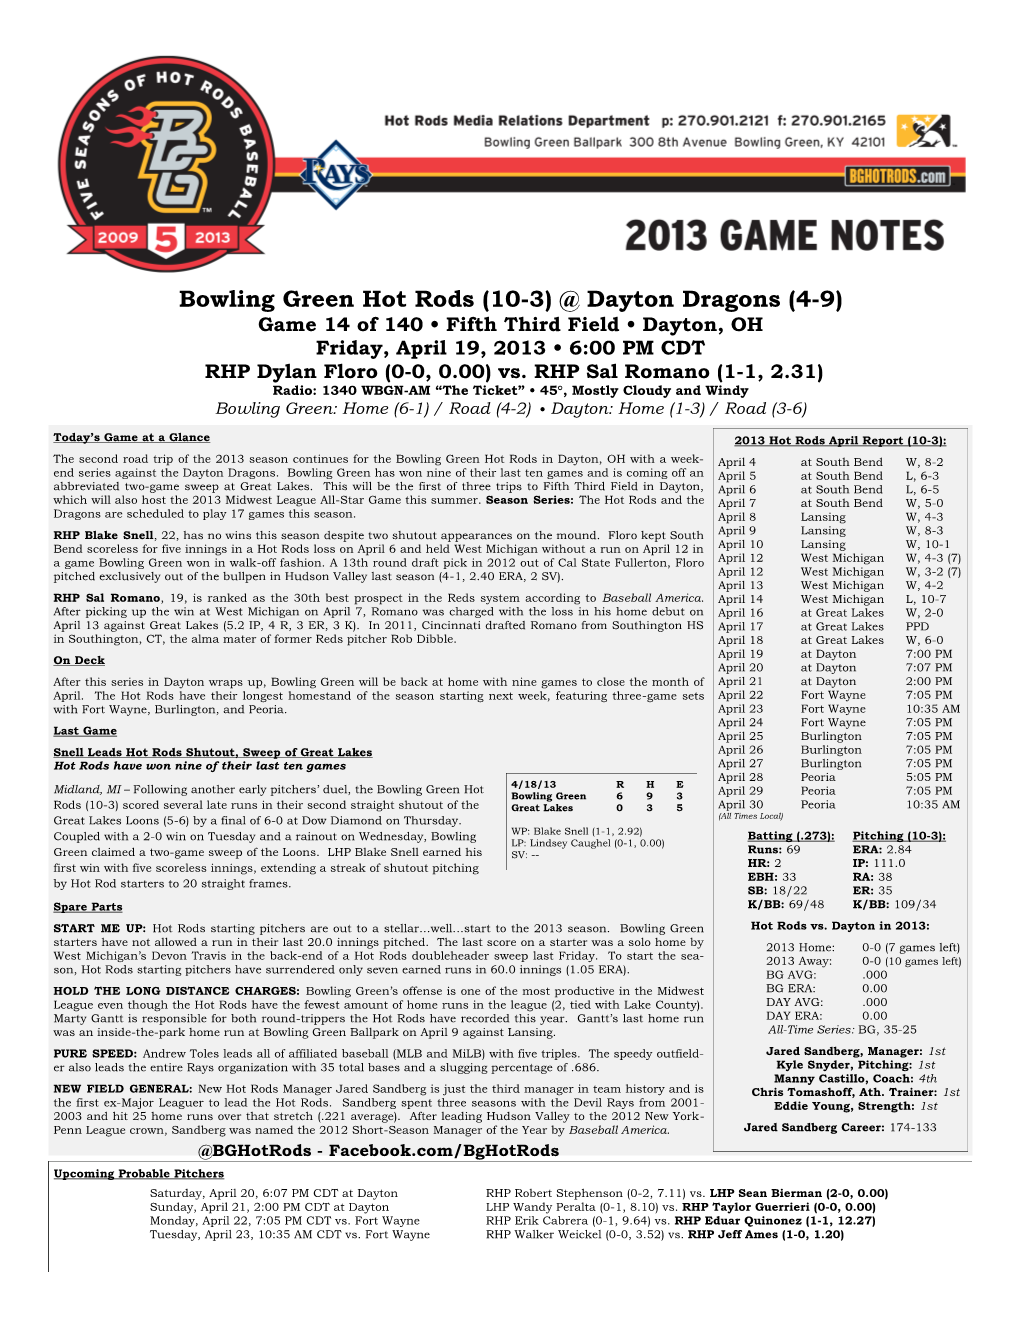 Hot Rods Game Notes 04192013